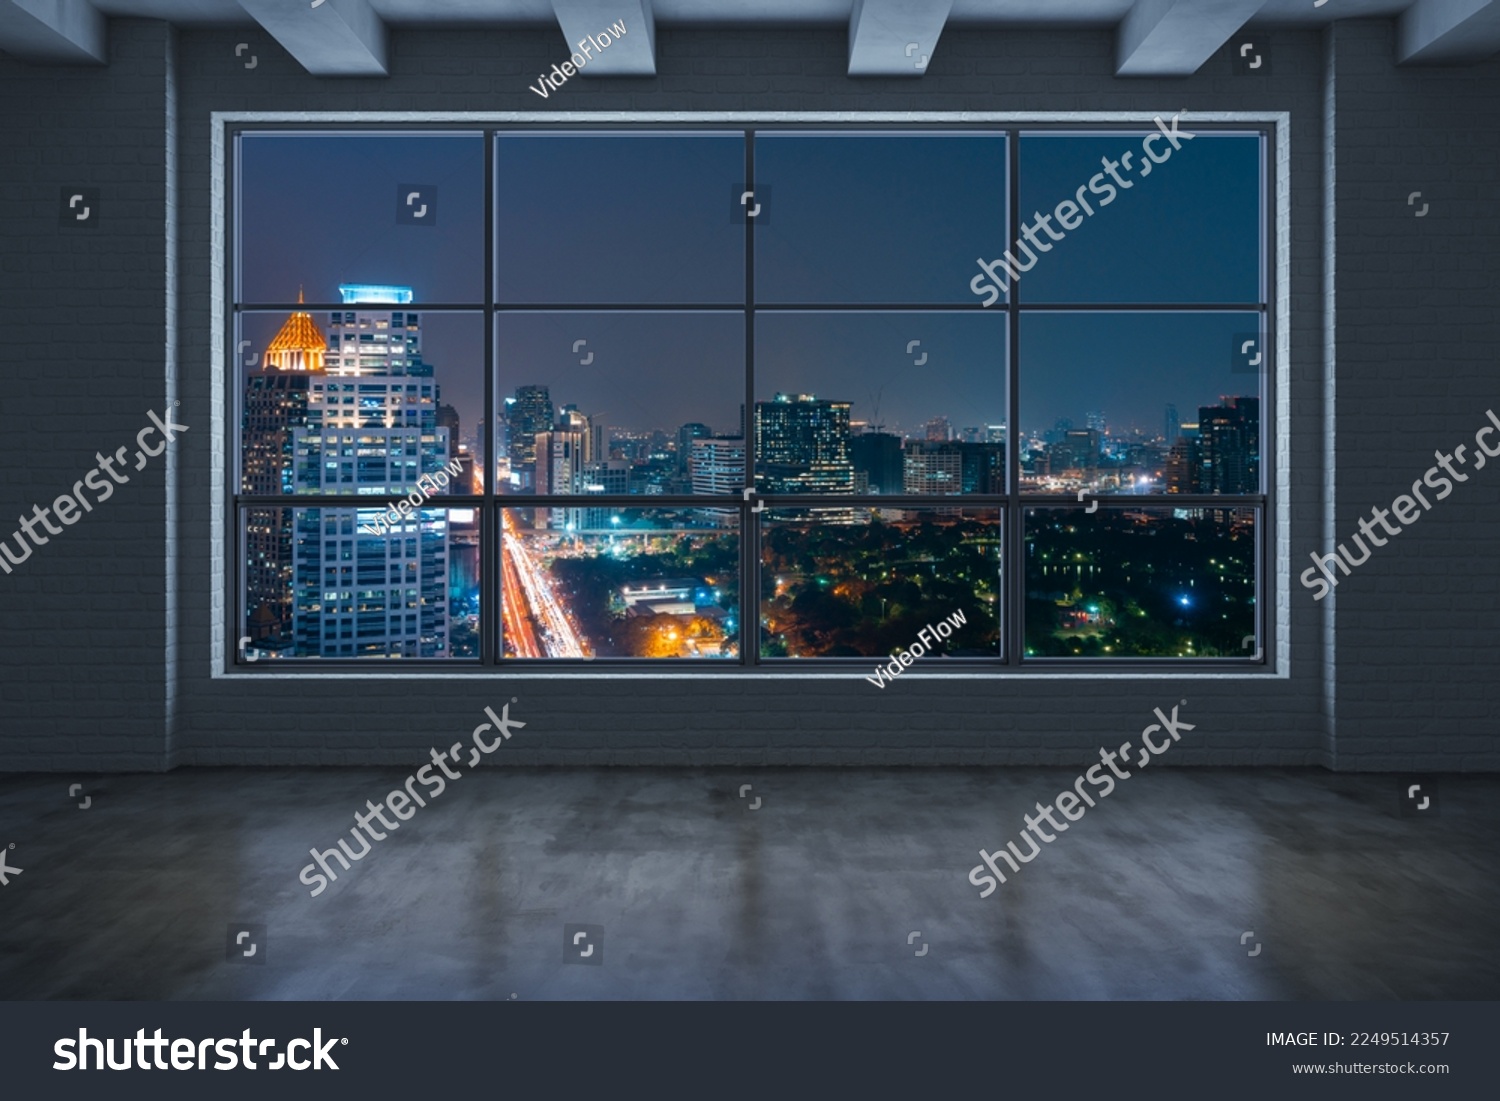 Empty room Interior Skyscrapers View Bangkok. Downtown City Skyline Buildings from High Rise Window. Beautiful Expensive Real Estate overlooking. Night time. 3d rendering. #2249514357